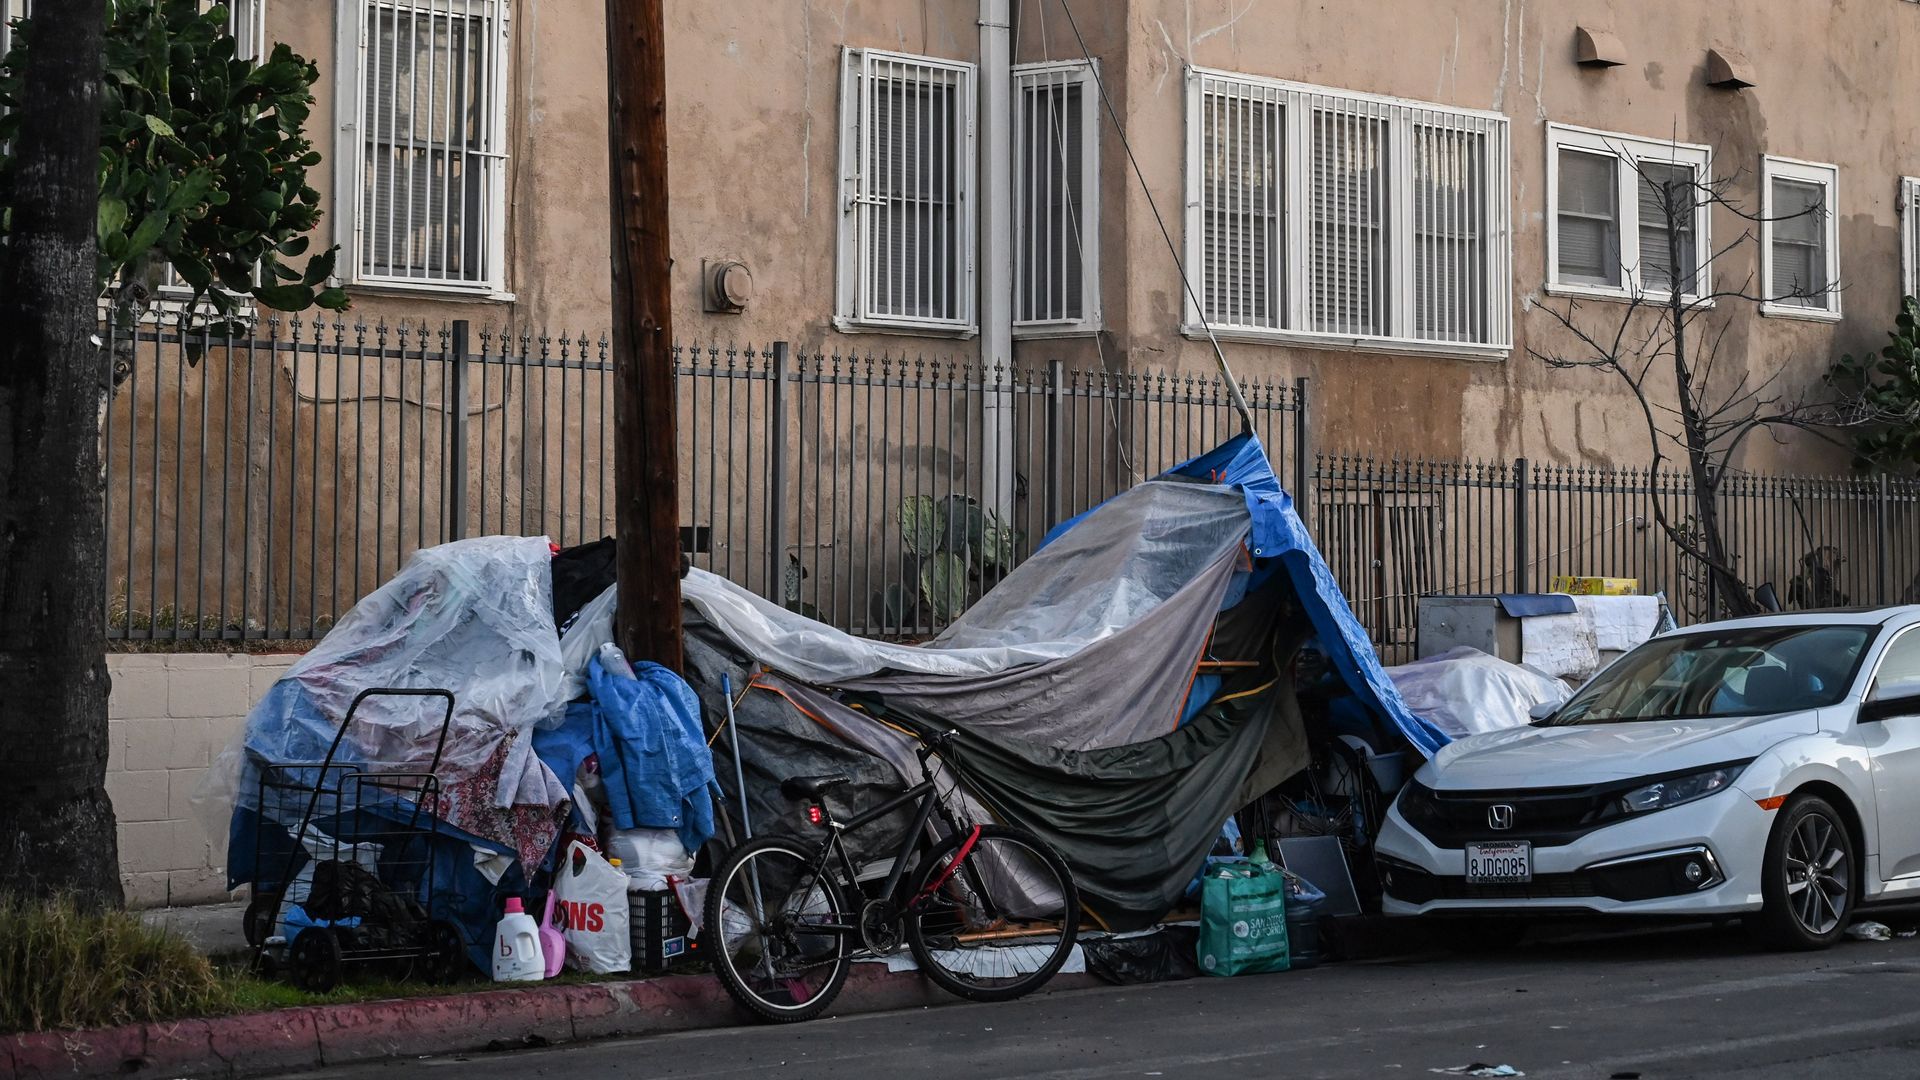 Tents sheltering homeless people line a residential street in Los Angeles, California, December 9, 201